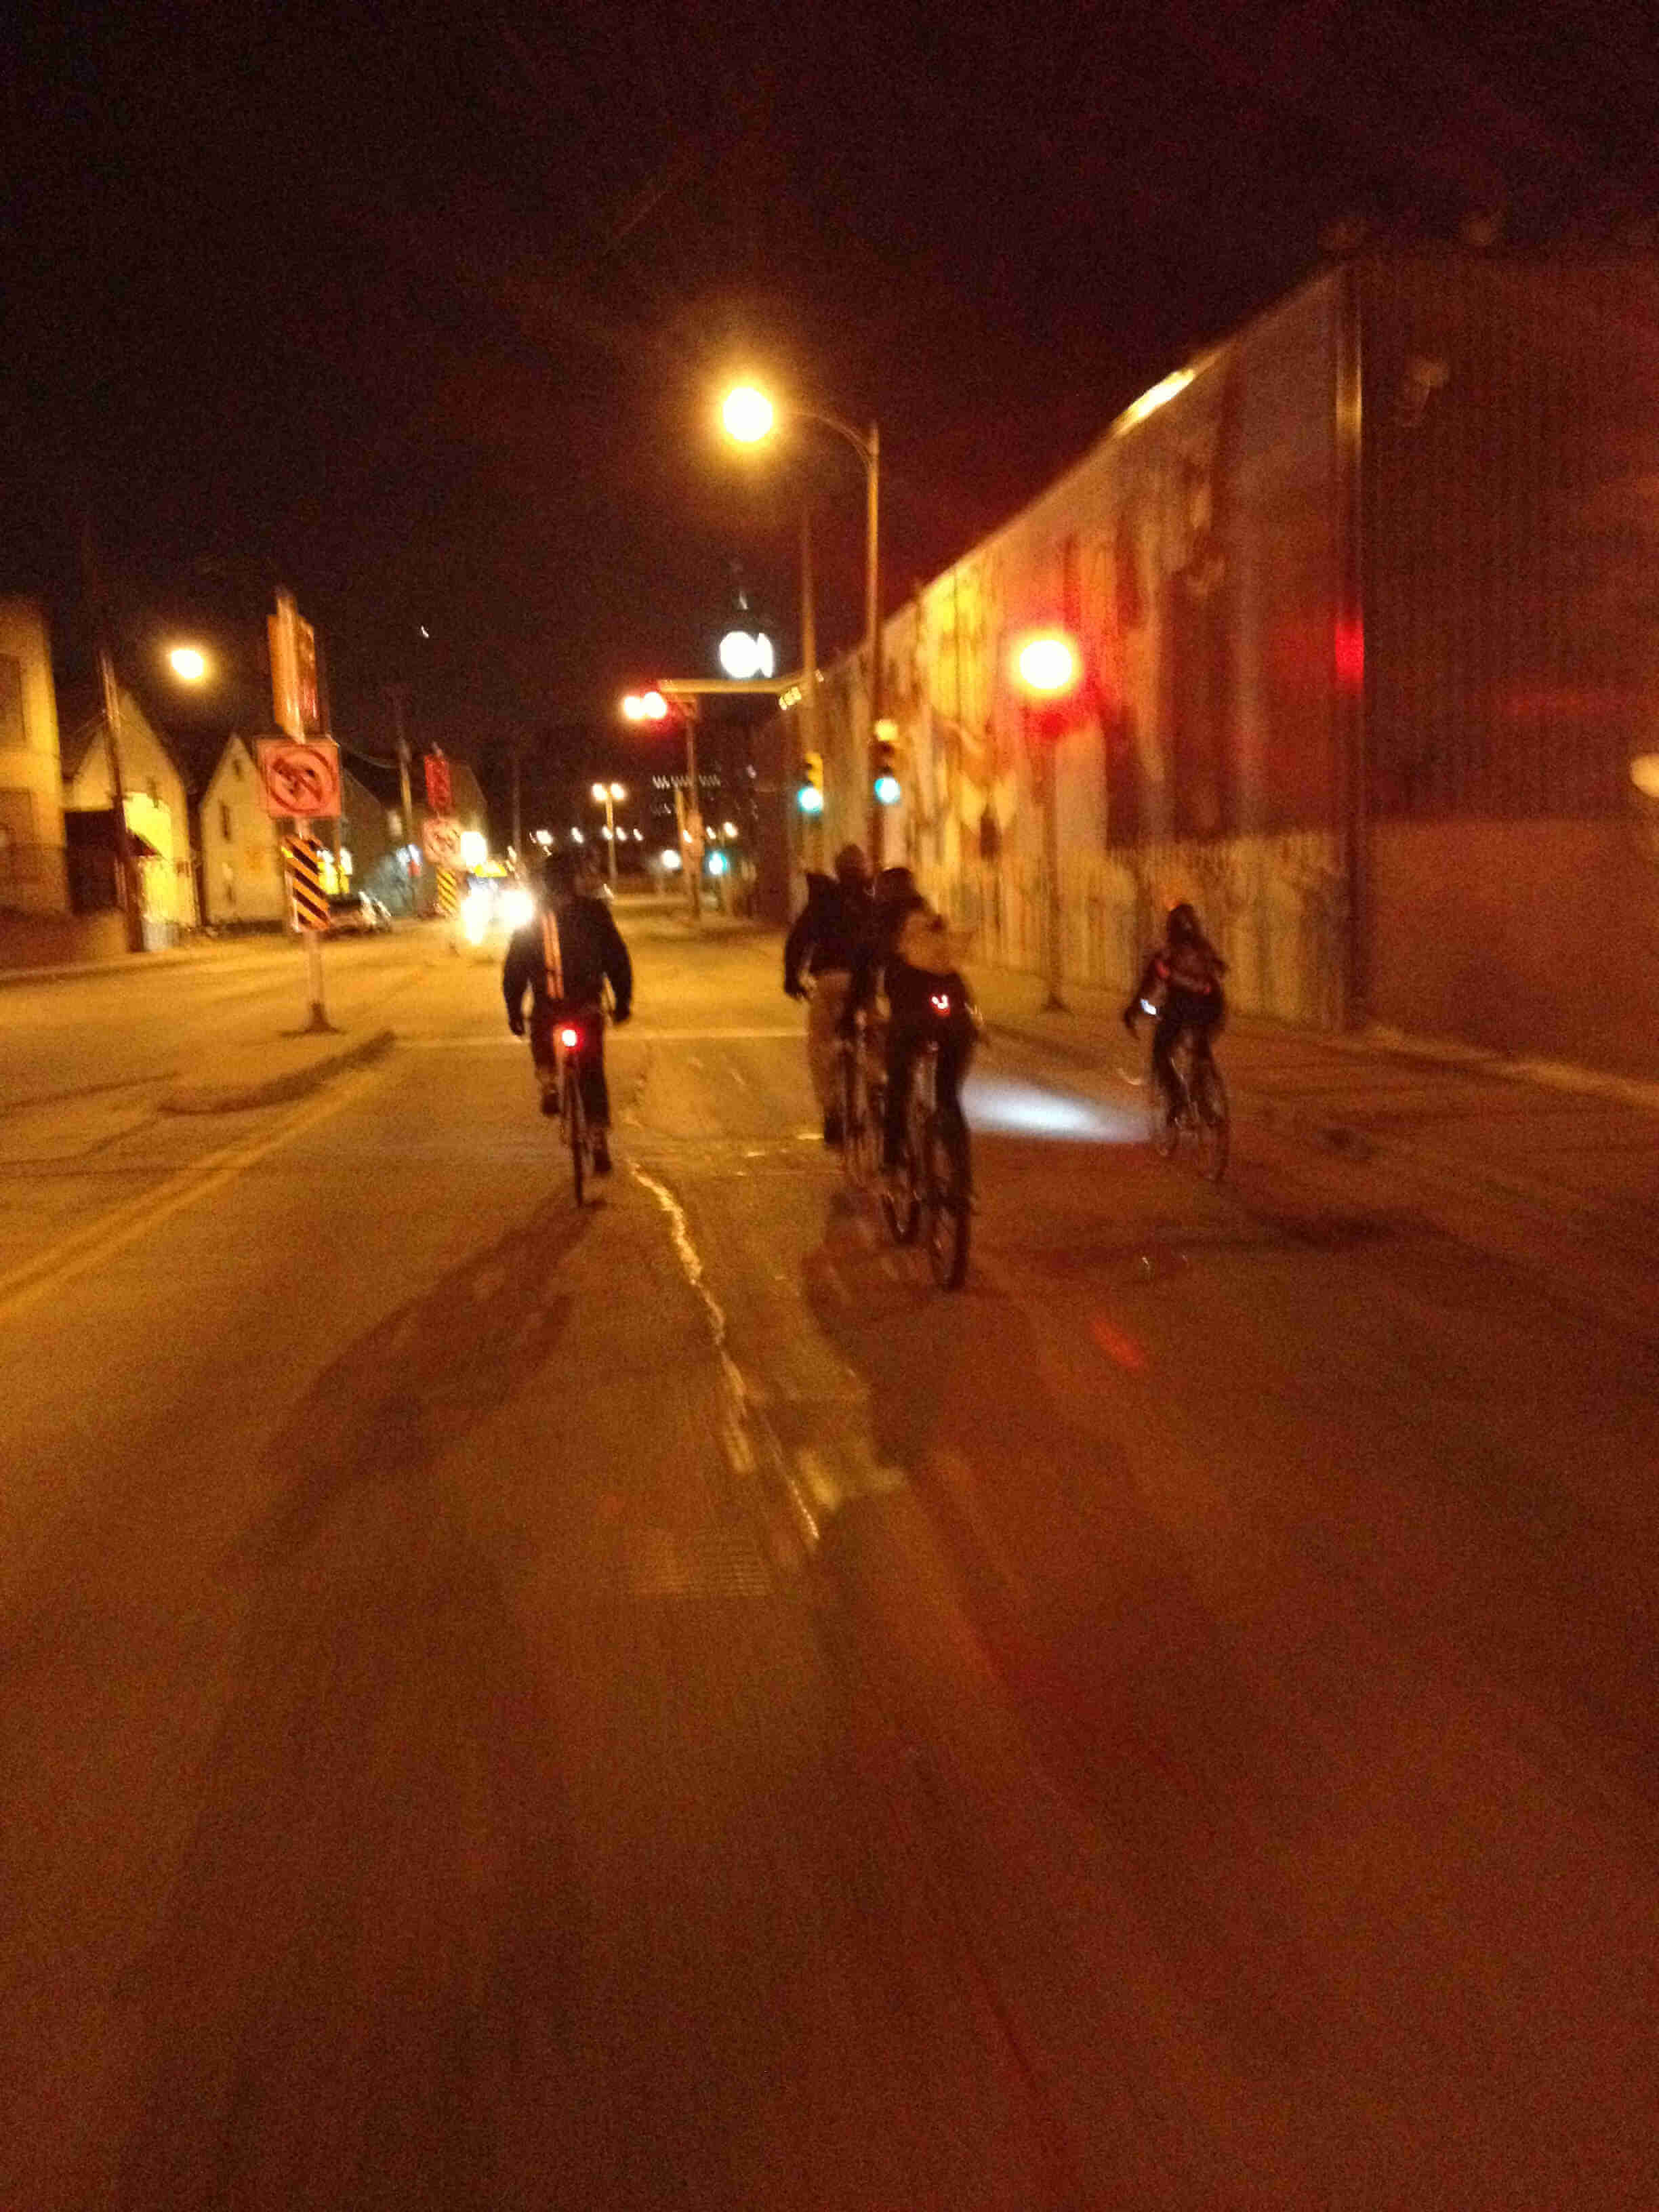 Right view of a group of cyclists riding on a street at night, with buildings on both sides of the road